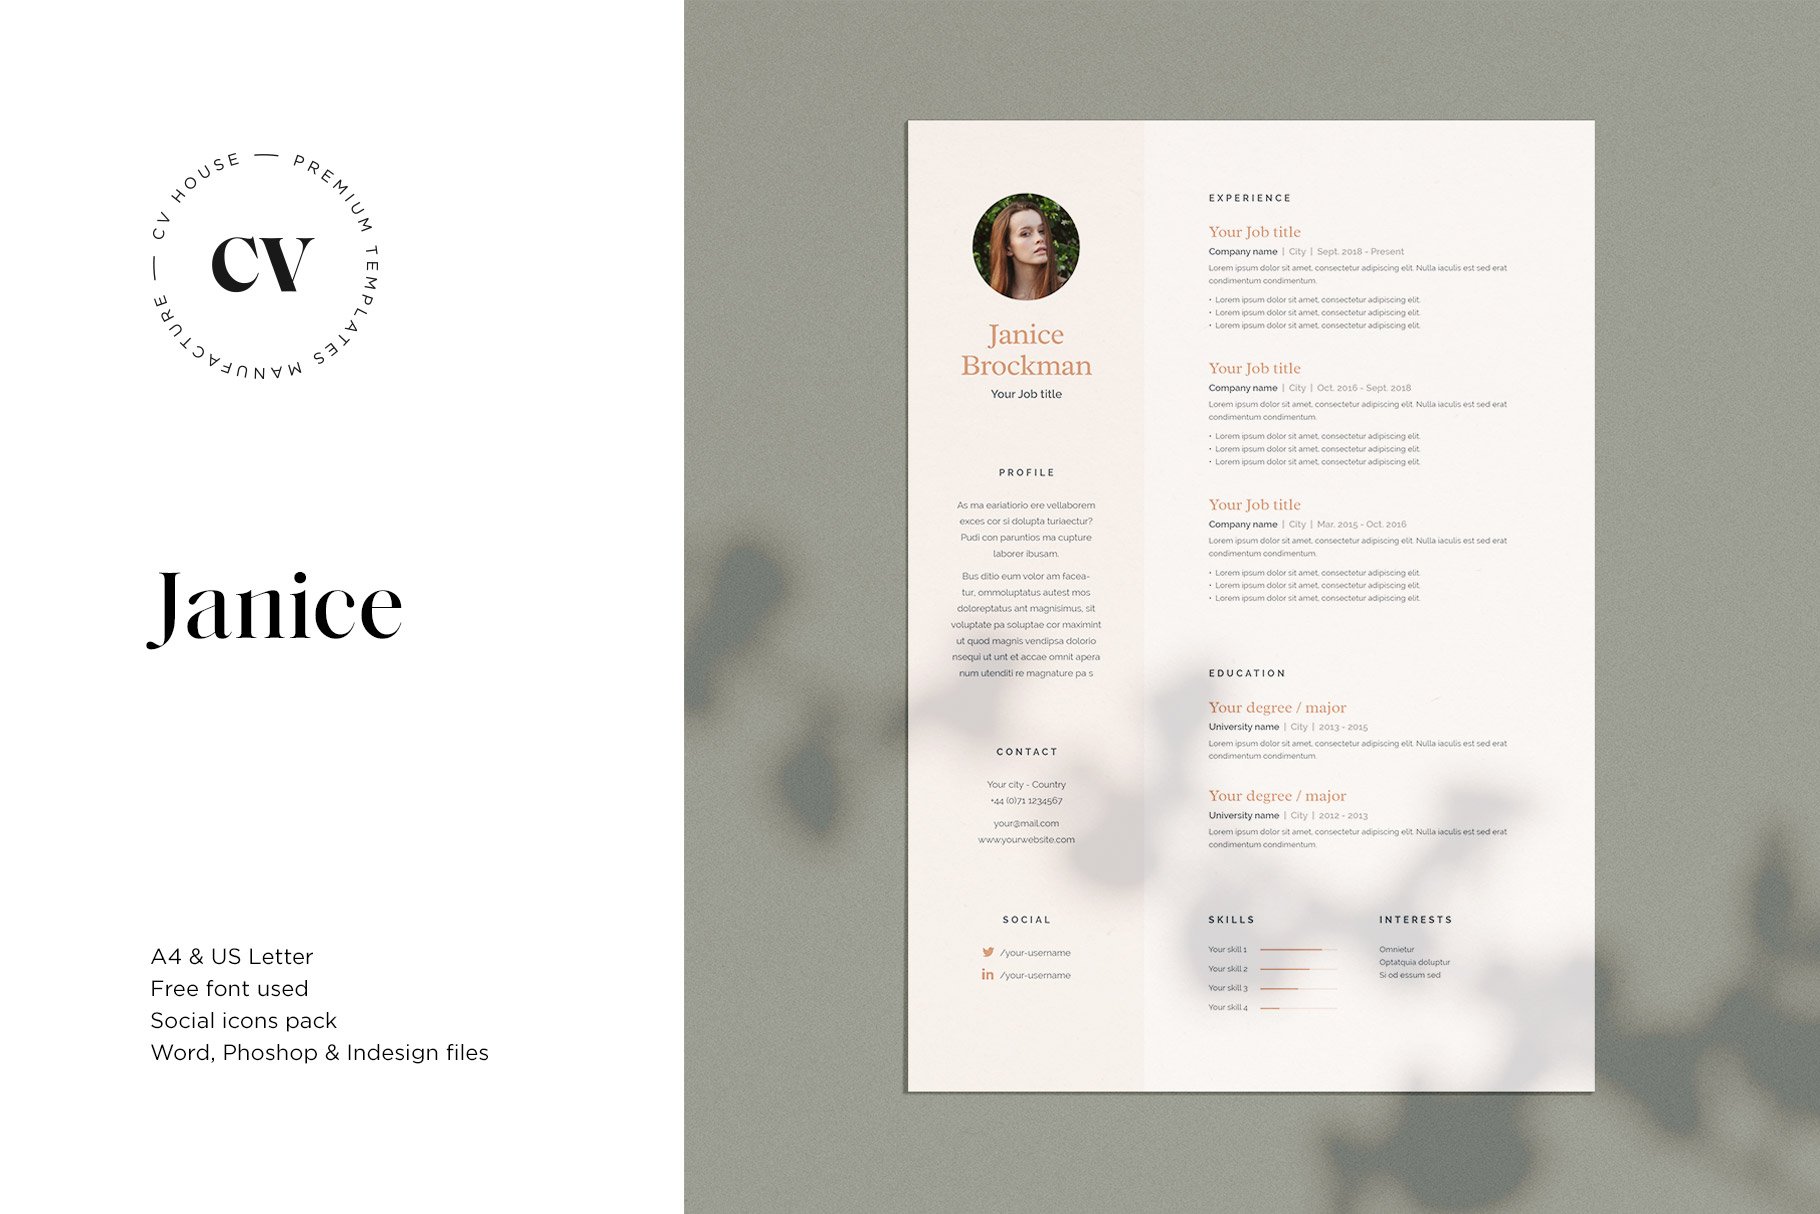 Janice | CV / resume template cover image.